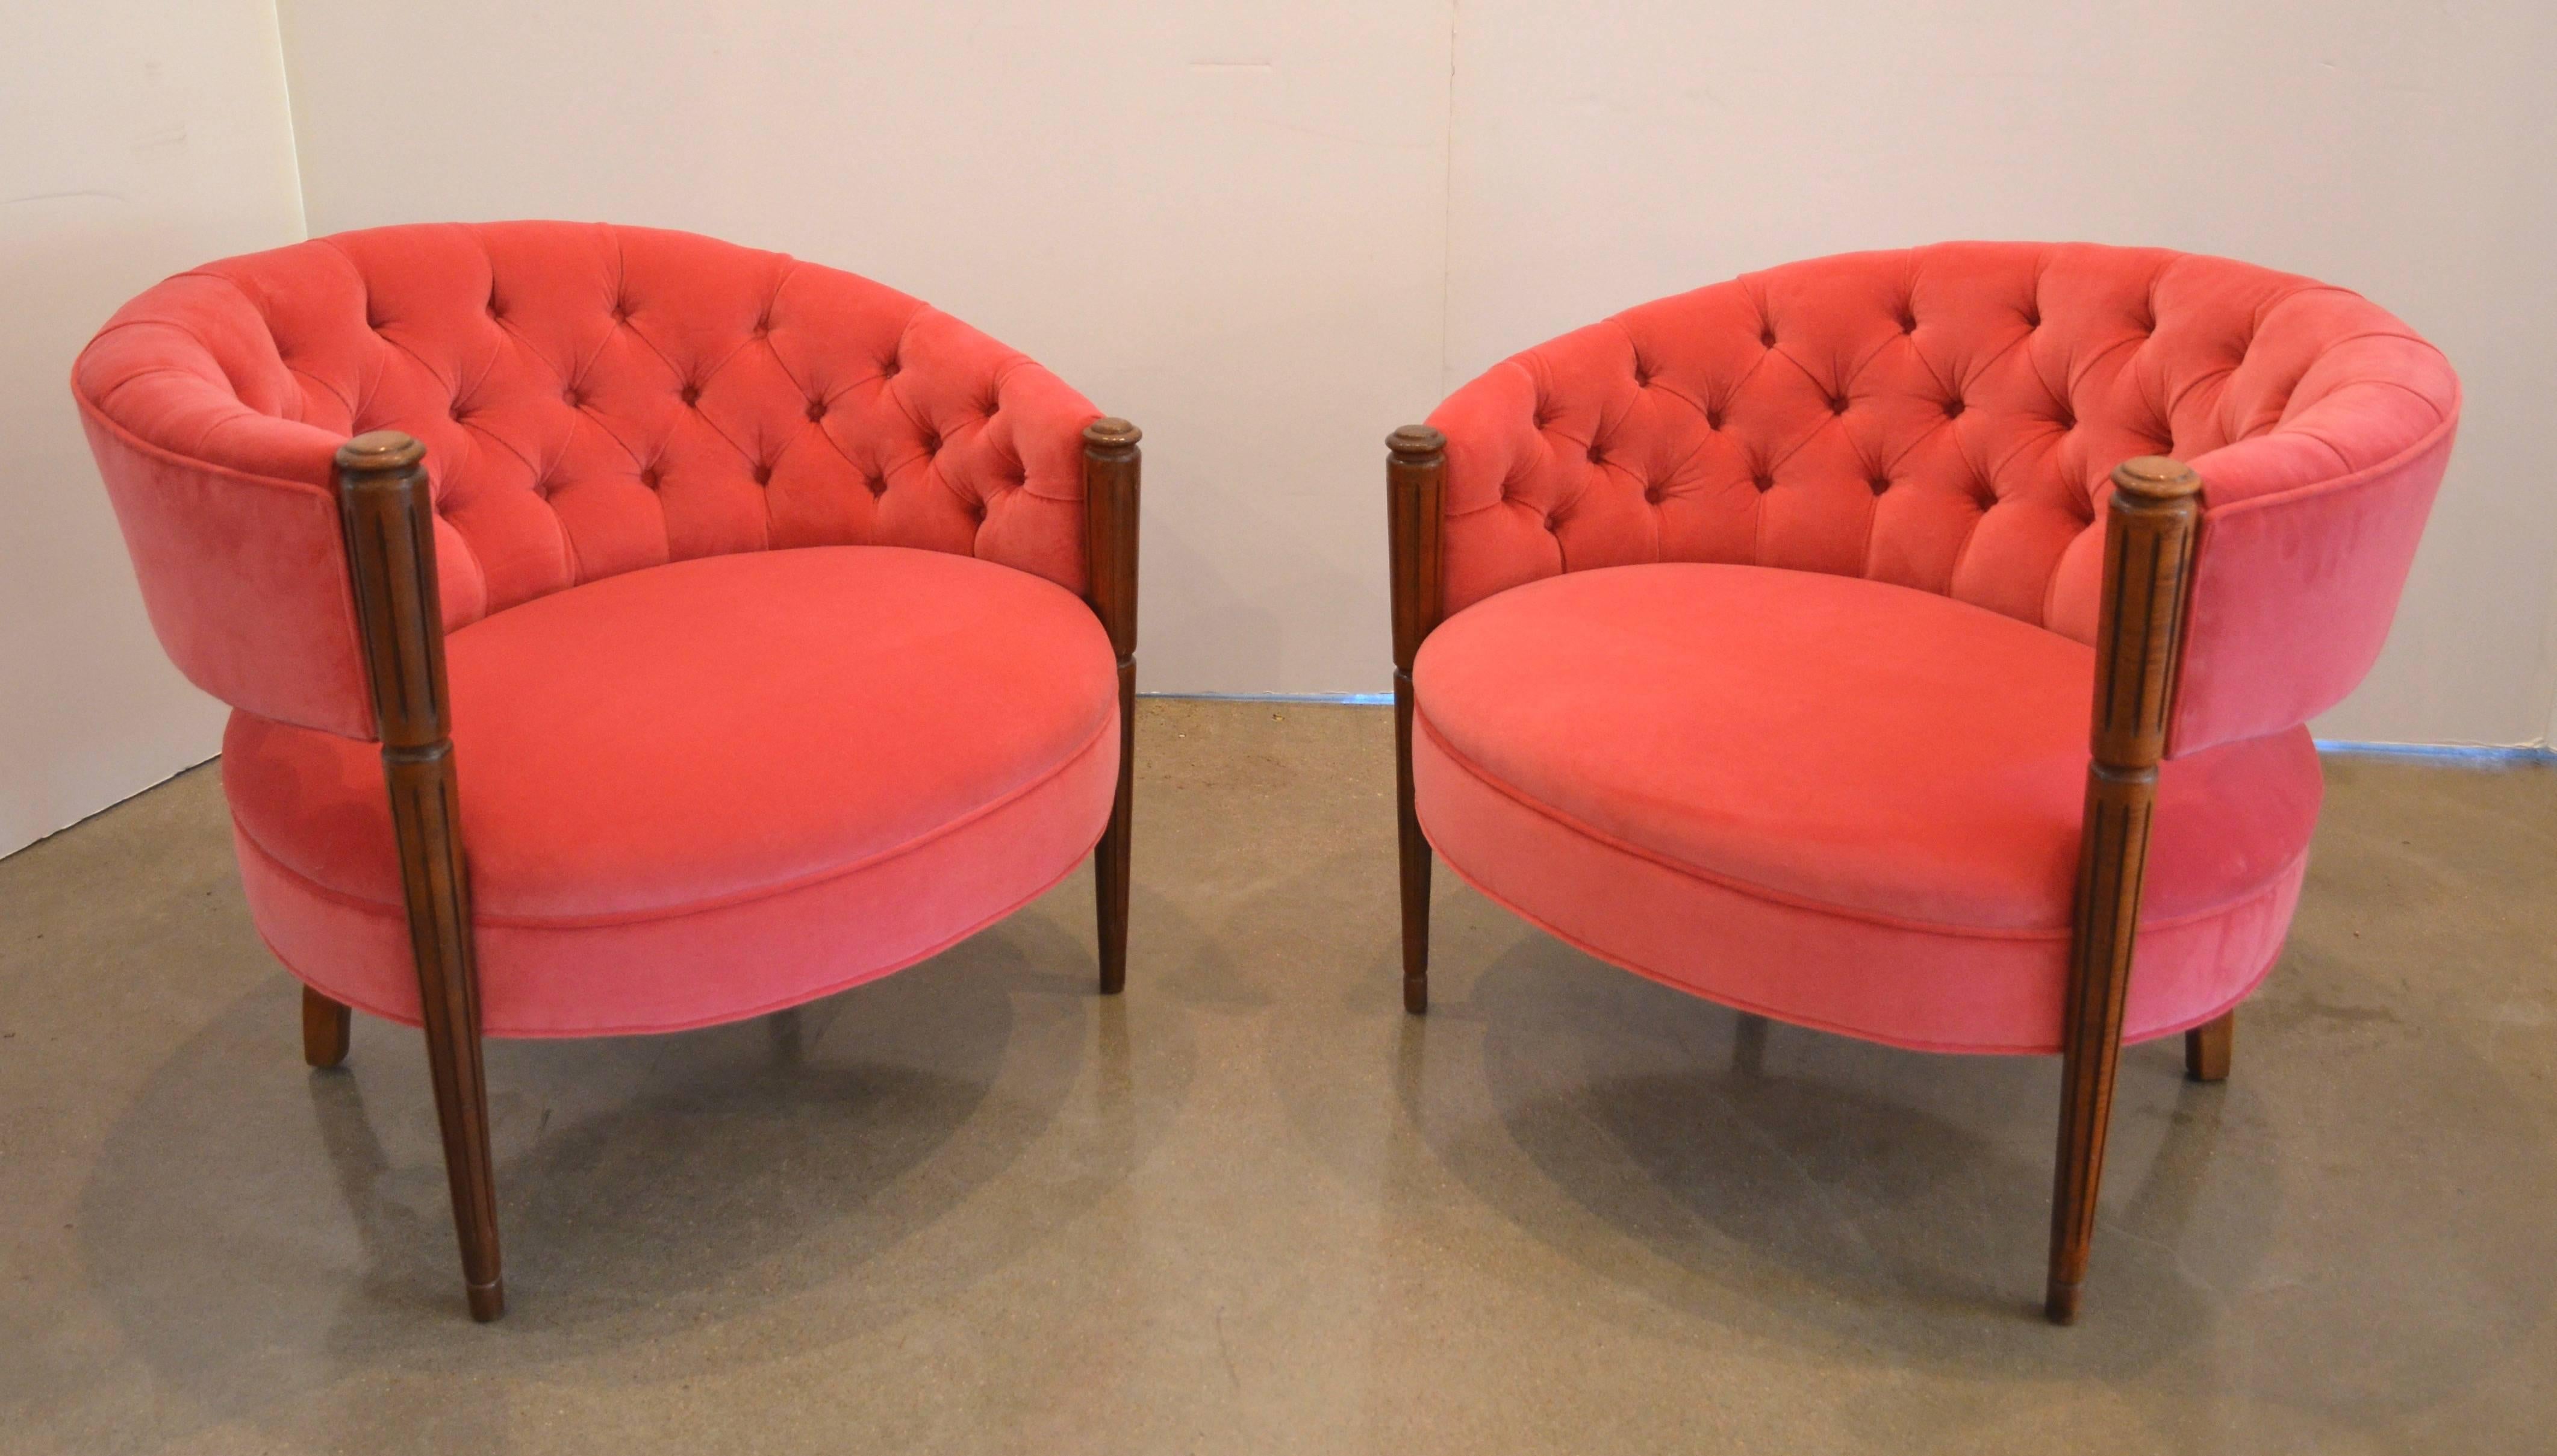 20th Century Pair of J. B. Van Sciver Tufted Chairs